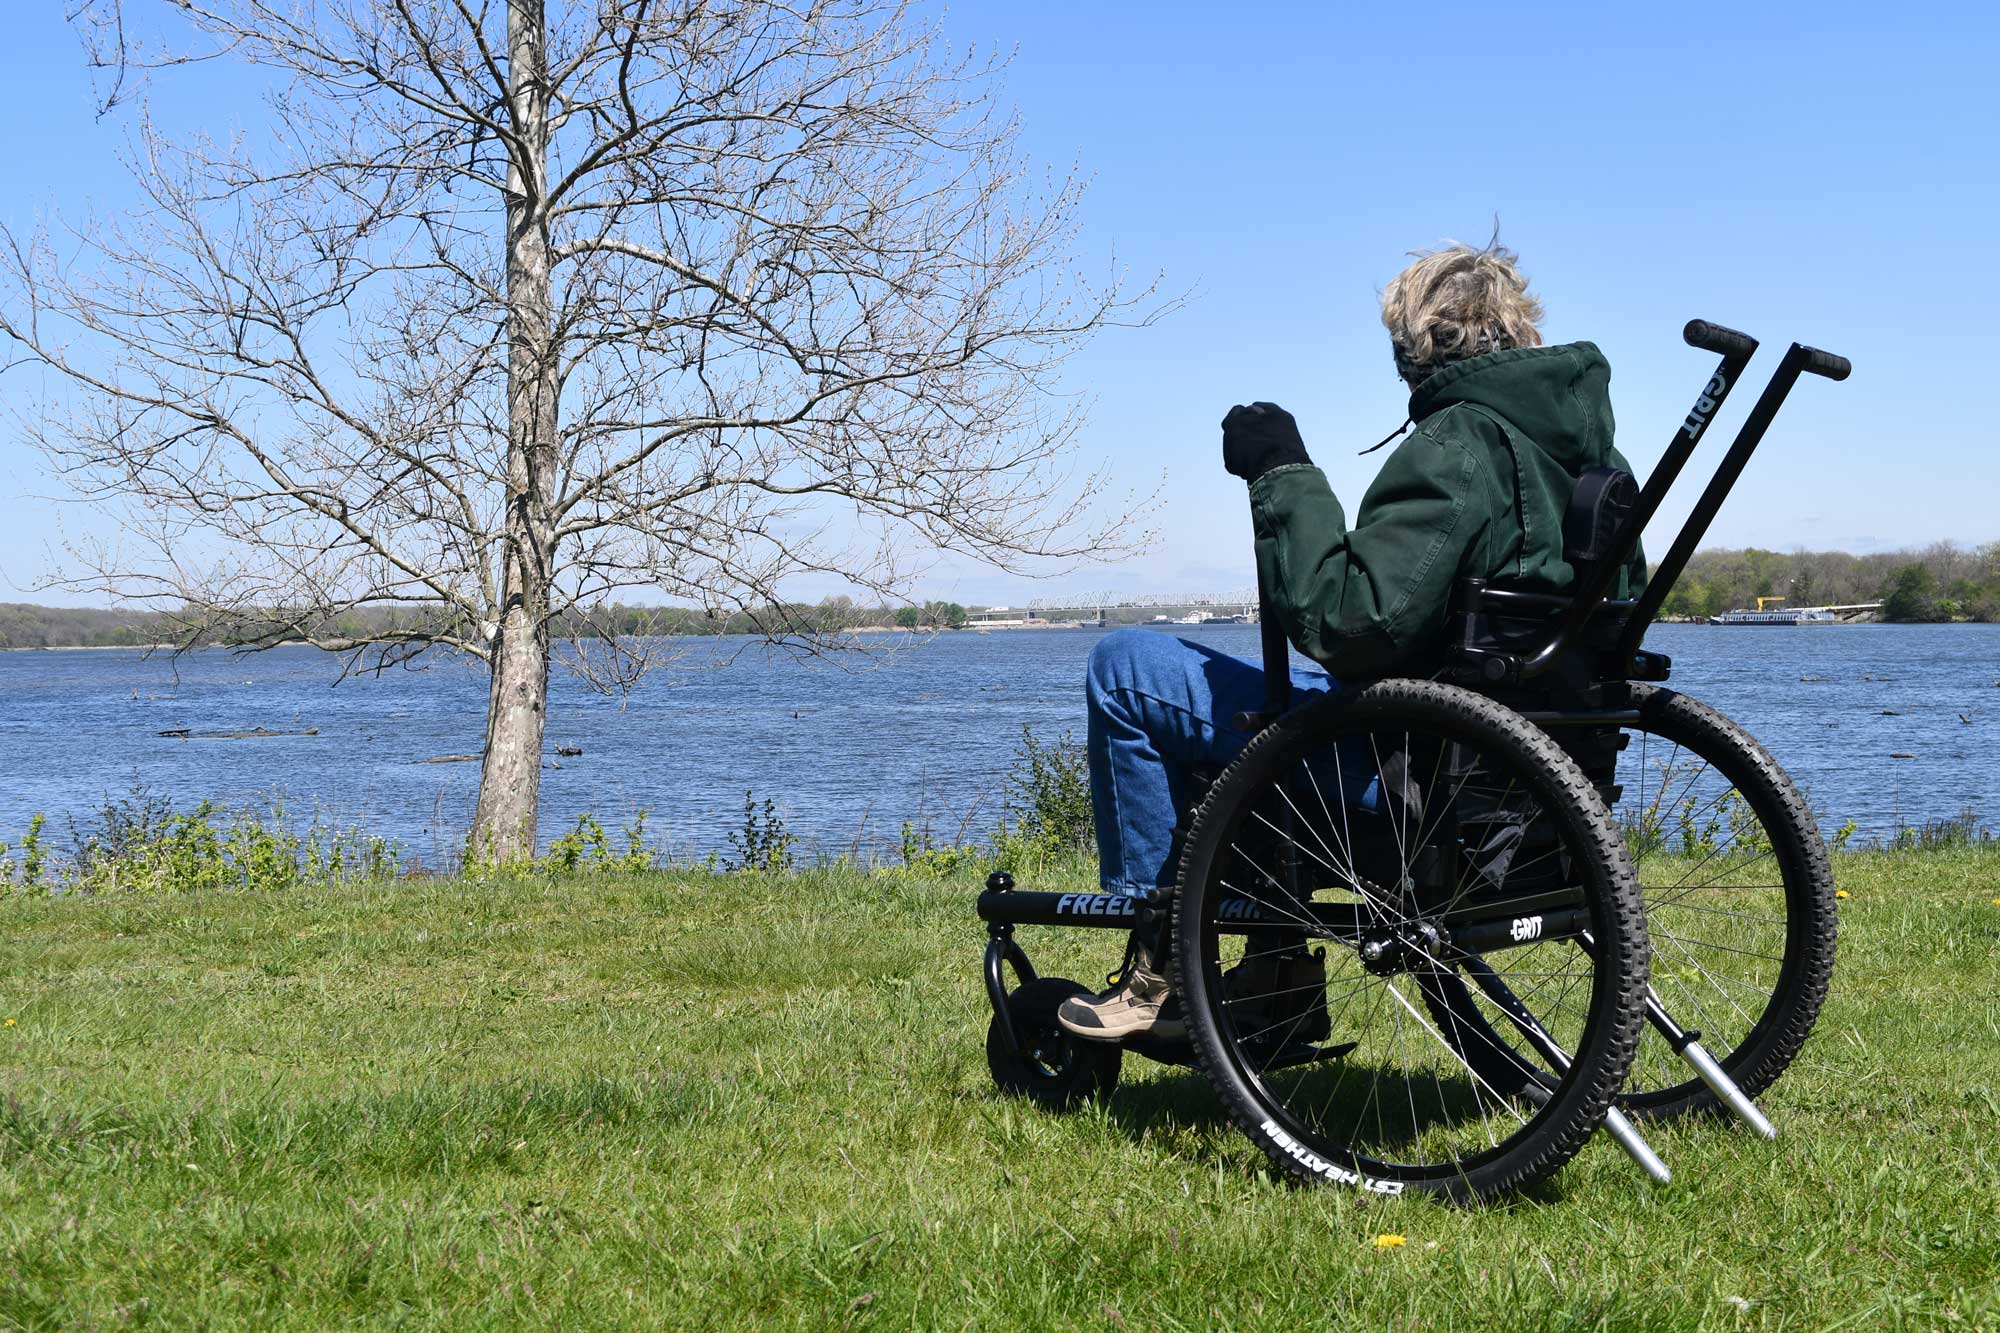 A woman in a wheelchair pauses along a river to take in the scenery.